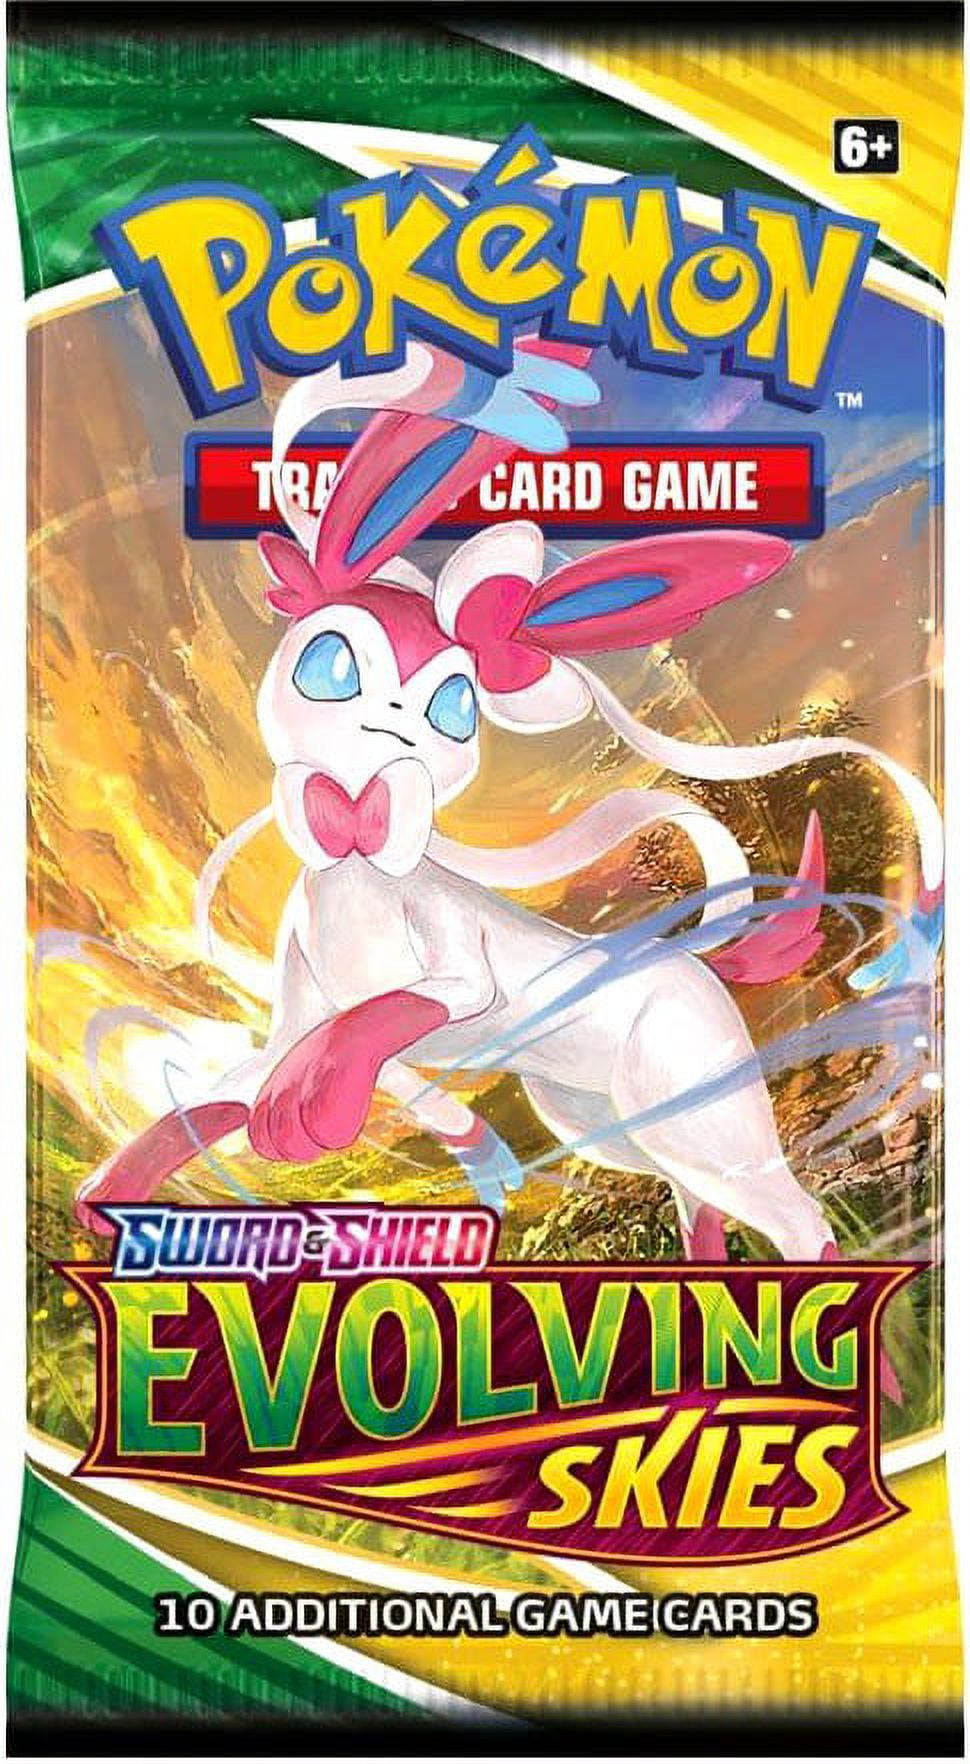 Evolving Skies Booster Pack, Collector Card Packs and Sets